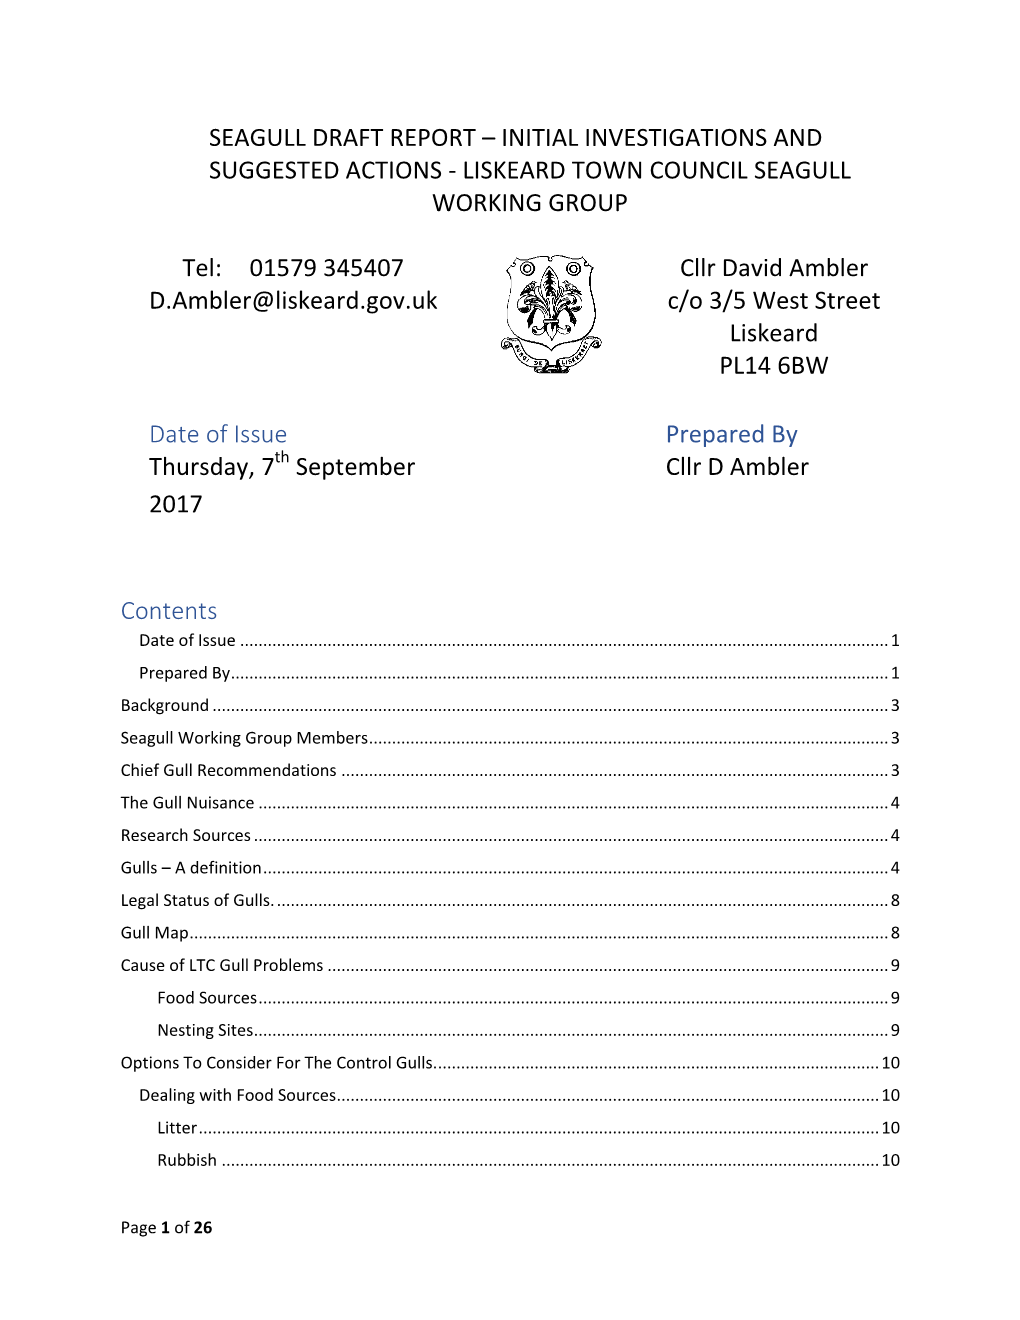 Seagull Draft Report – Initial Investigations and Suggested Actions - Liskeard Town Council Seagull Working Group